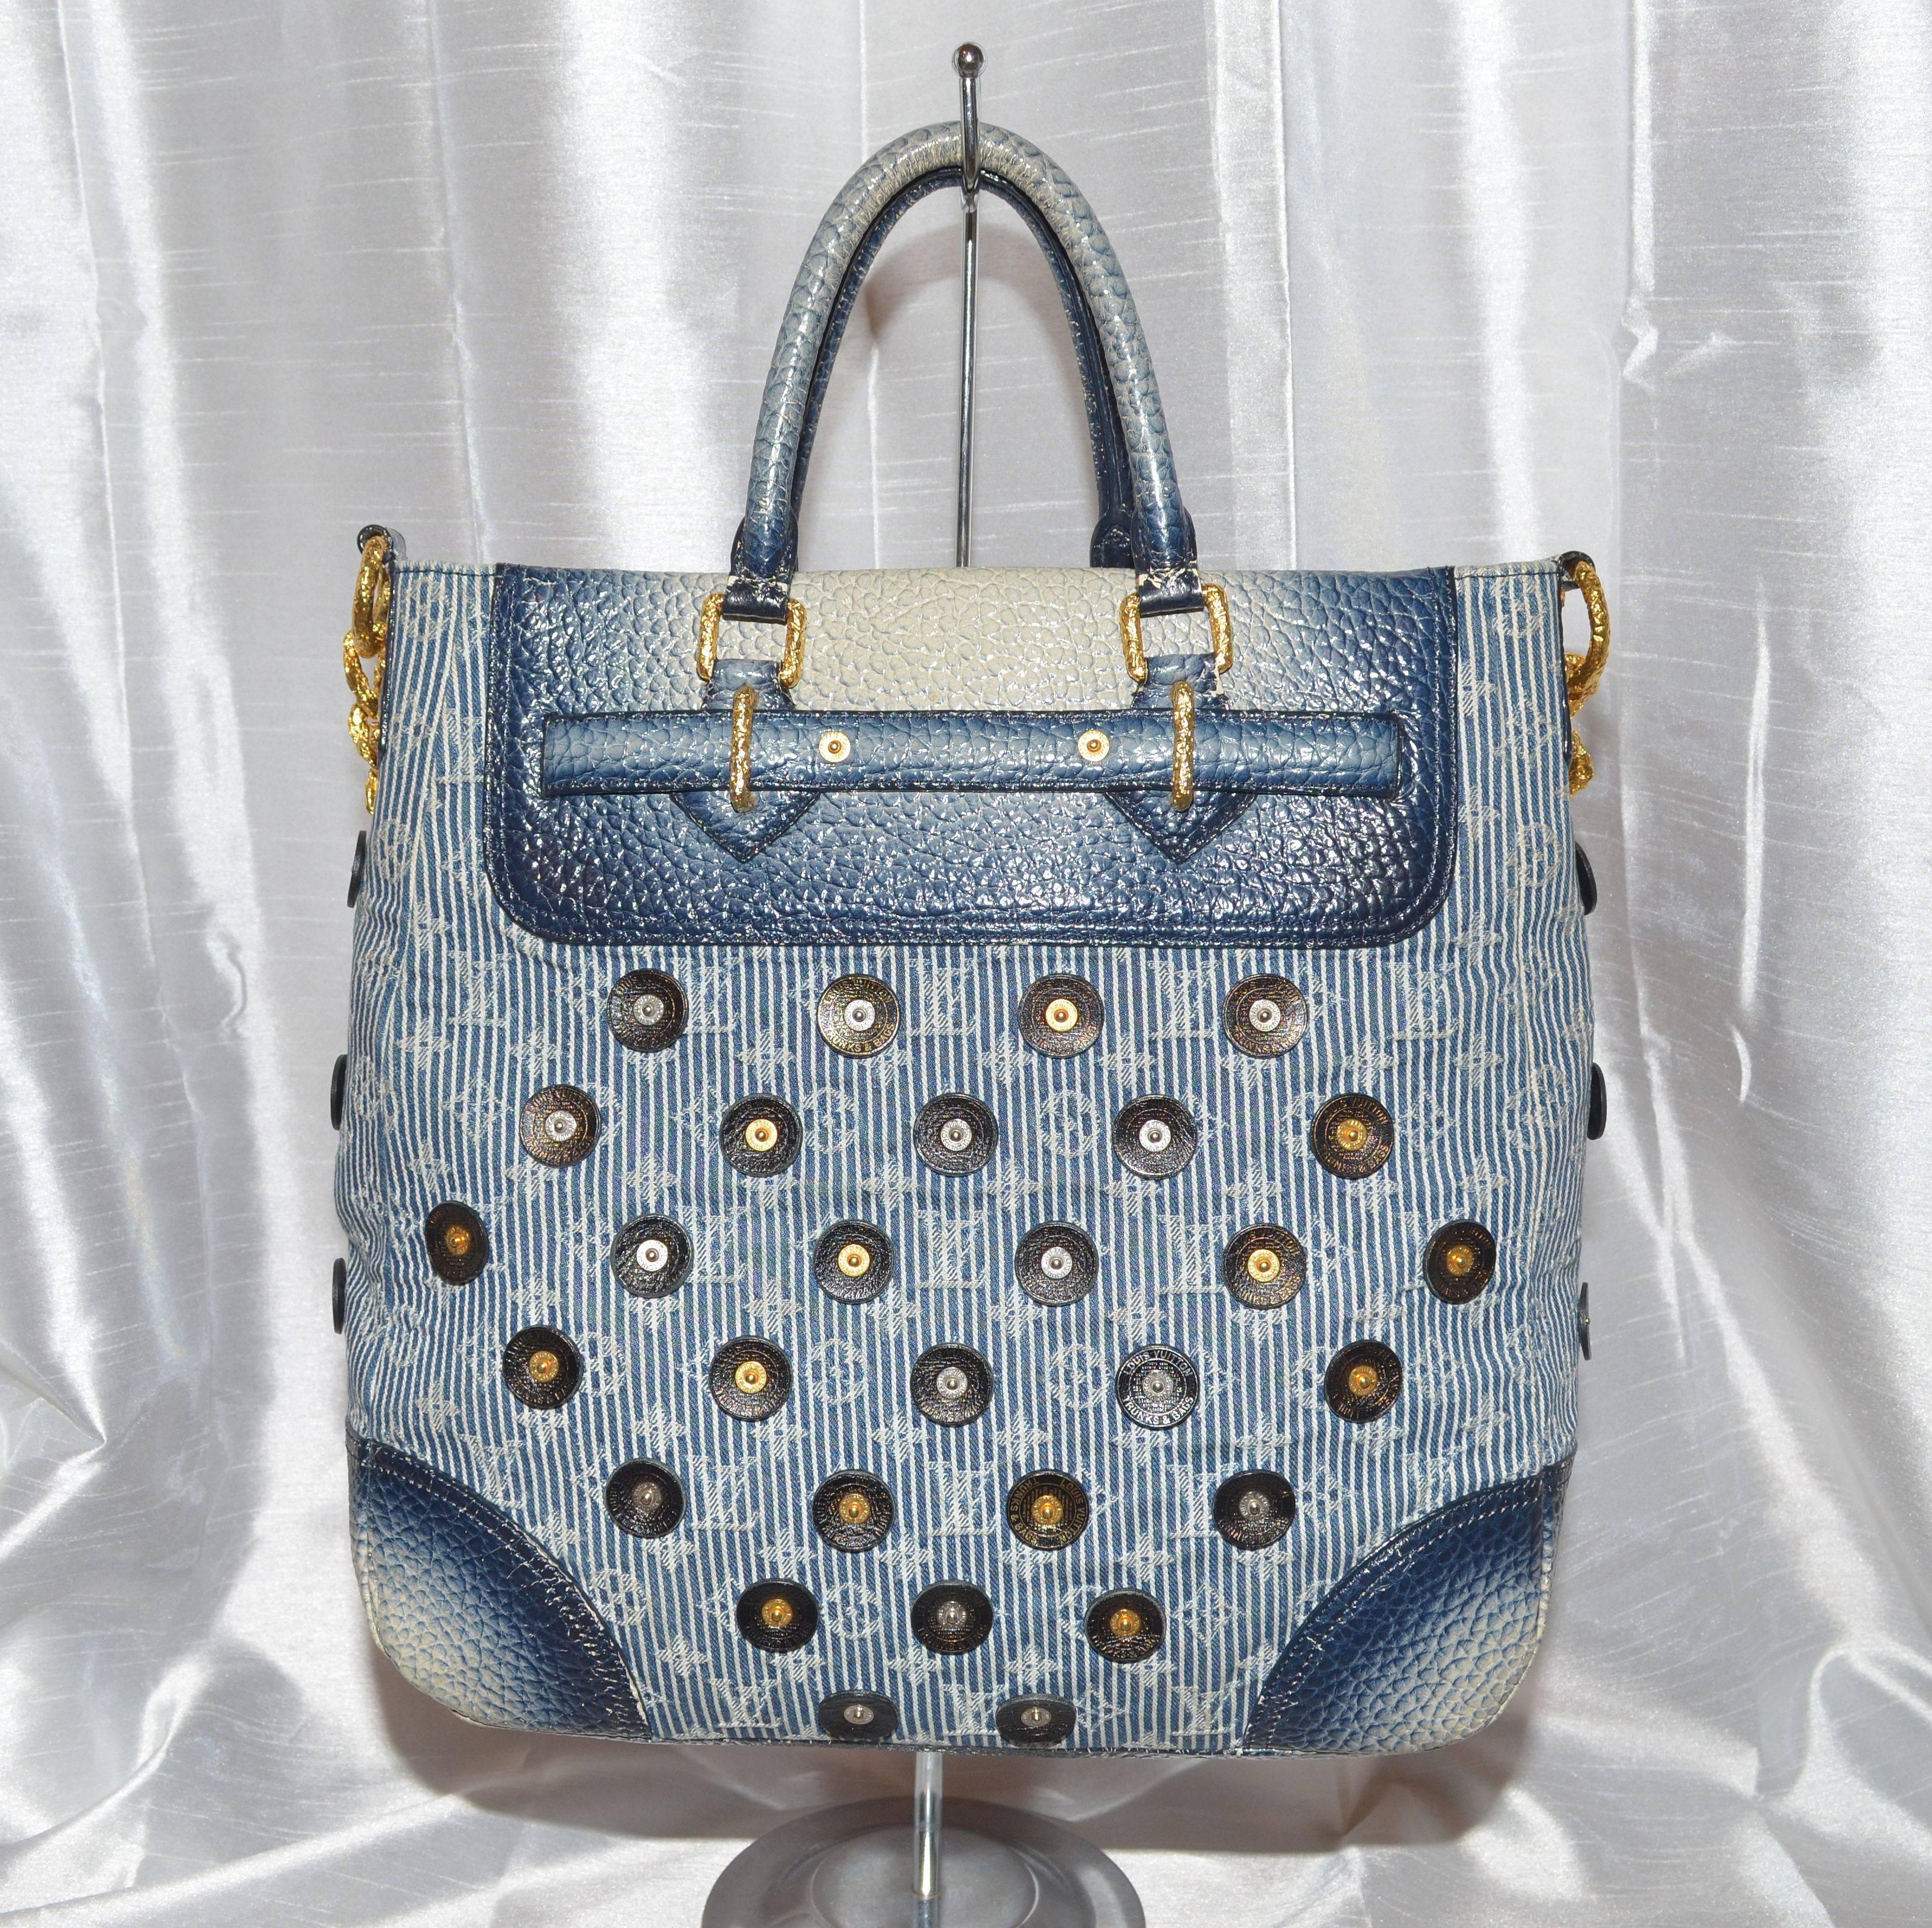 Louis Vuitton tote features a denim monogram fabric throughout with leather and gold-tone metal applique. Two top rolled handles, thick gold chain-link shoulder strap, and a pebbled leather base. Decorative padlock with functioning keys. Interior is